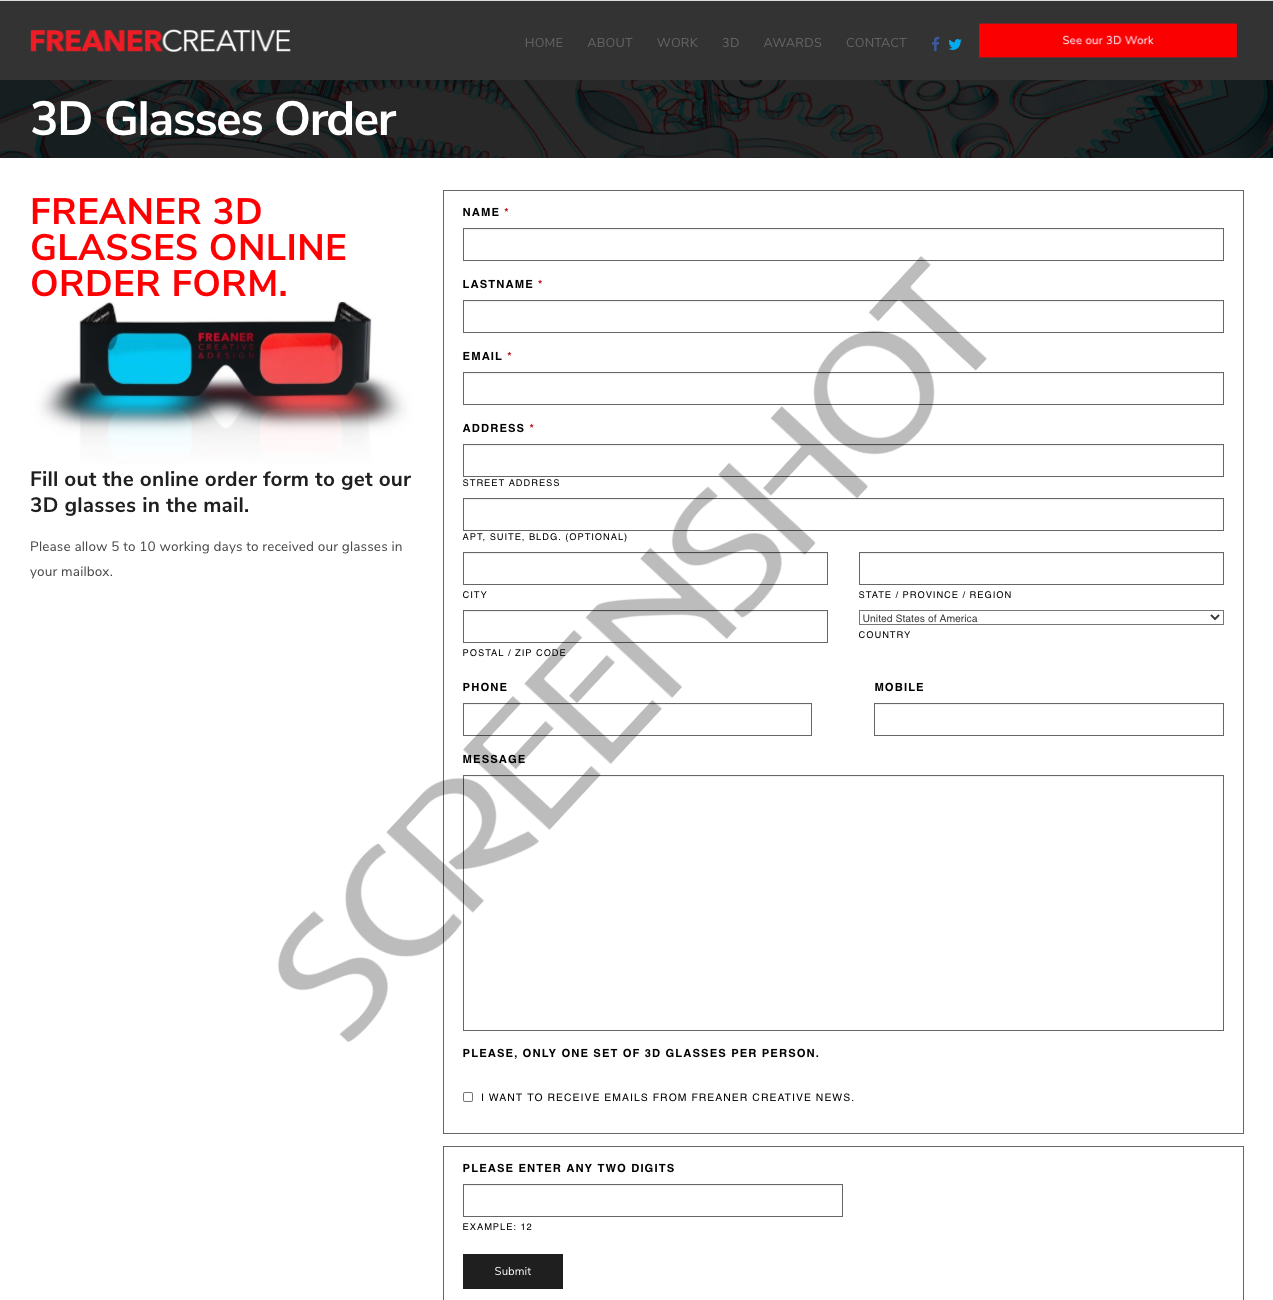 Screenshot of FREE Pair of 3D Glasses from Freaner Creative